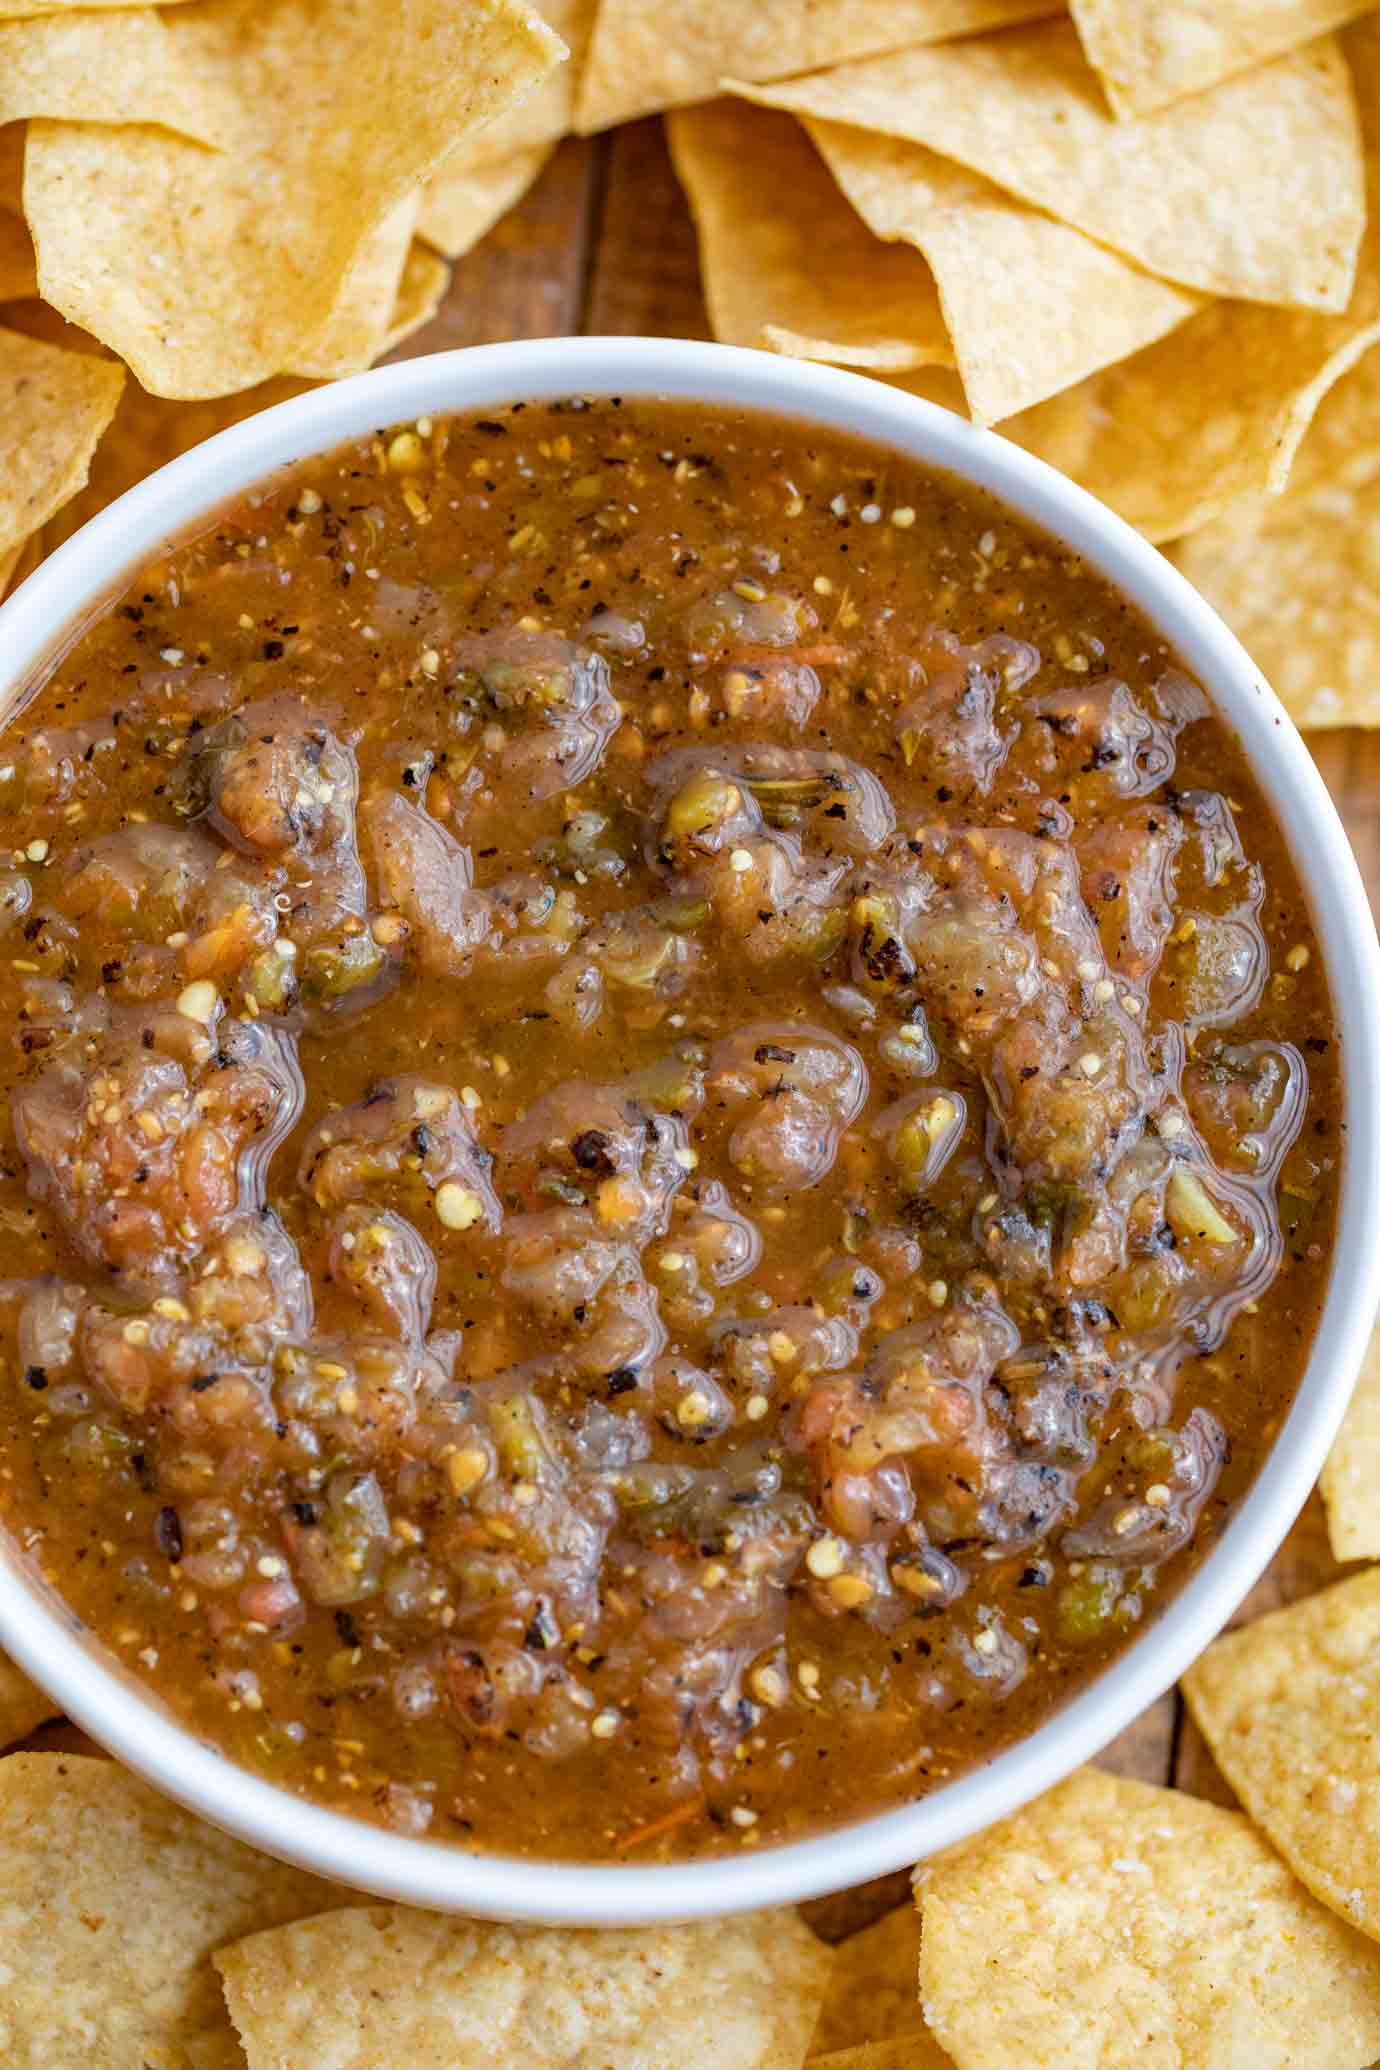 what is the best salsa at chipotle?